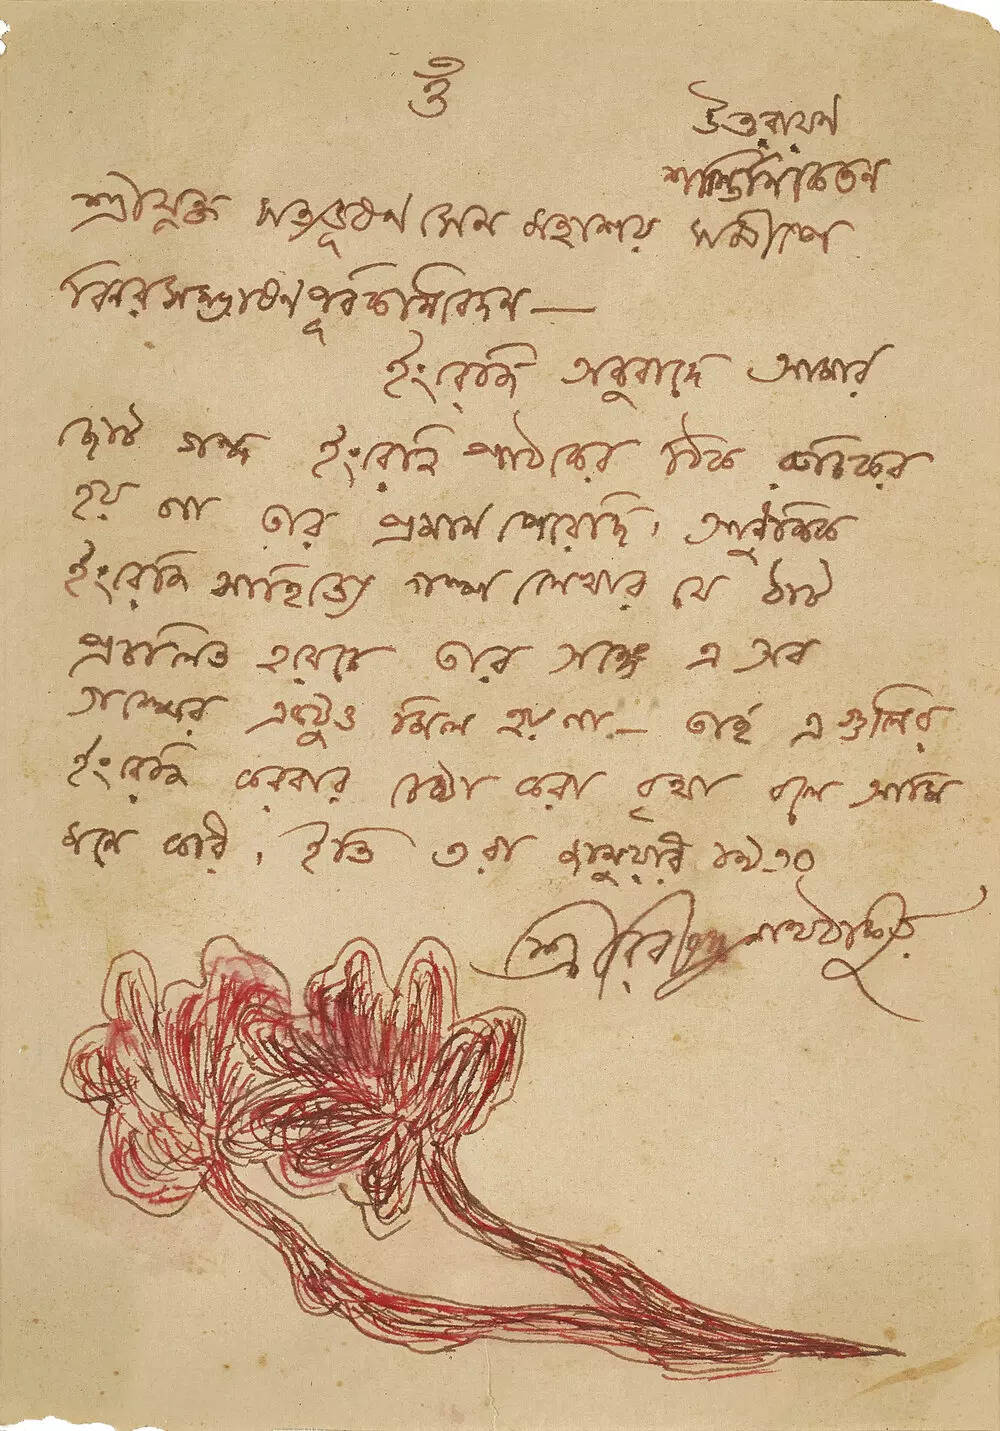 Tagore's letter